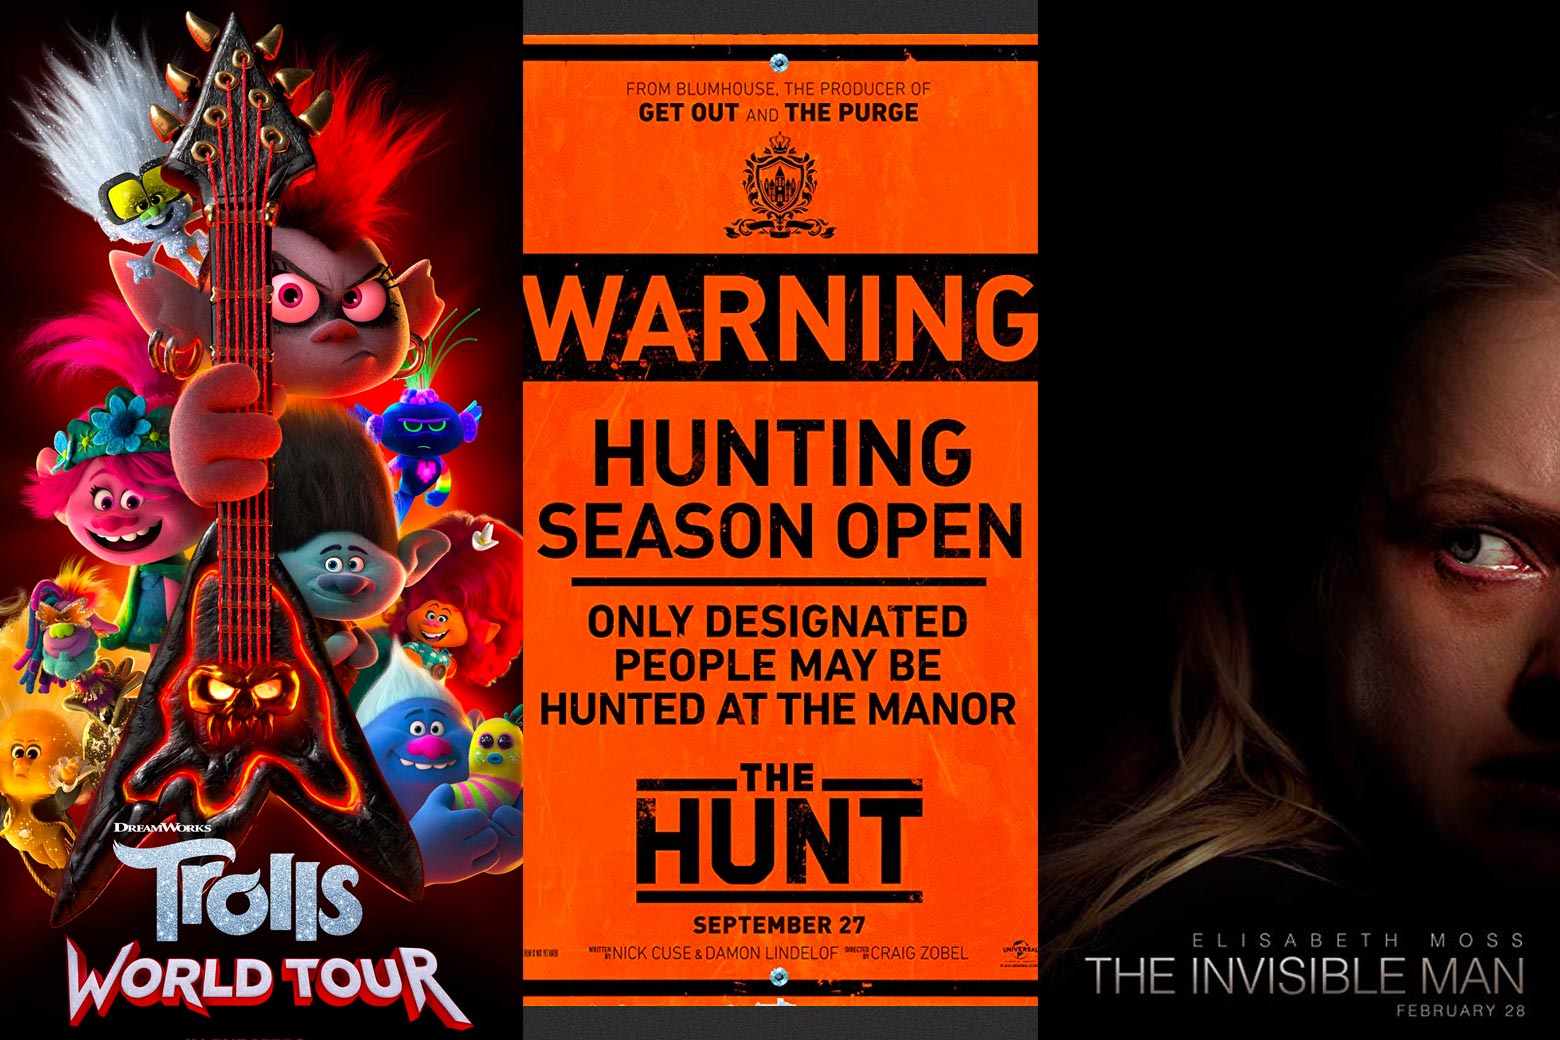 Posters for Trolls World Tour, The Hunt, and The Invisible Man